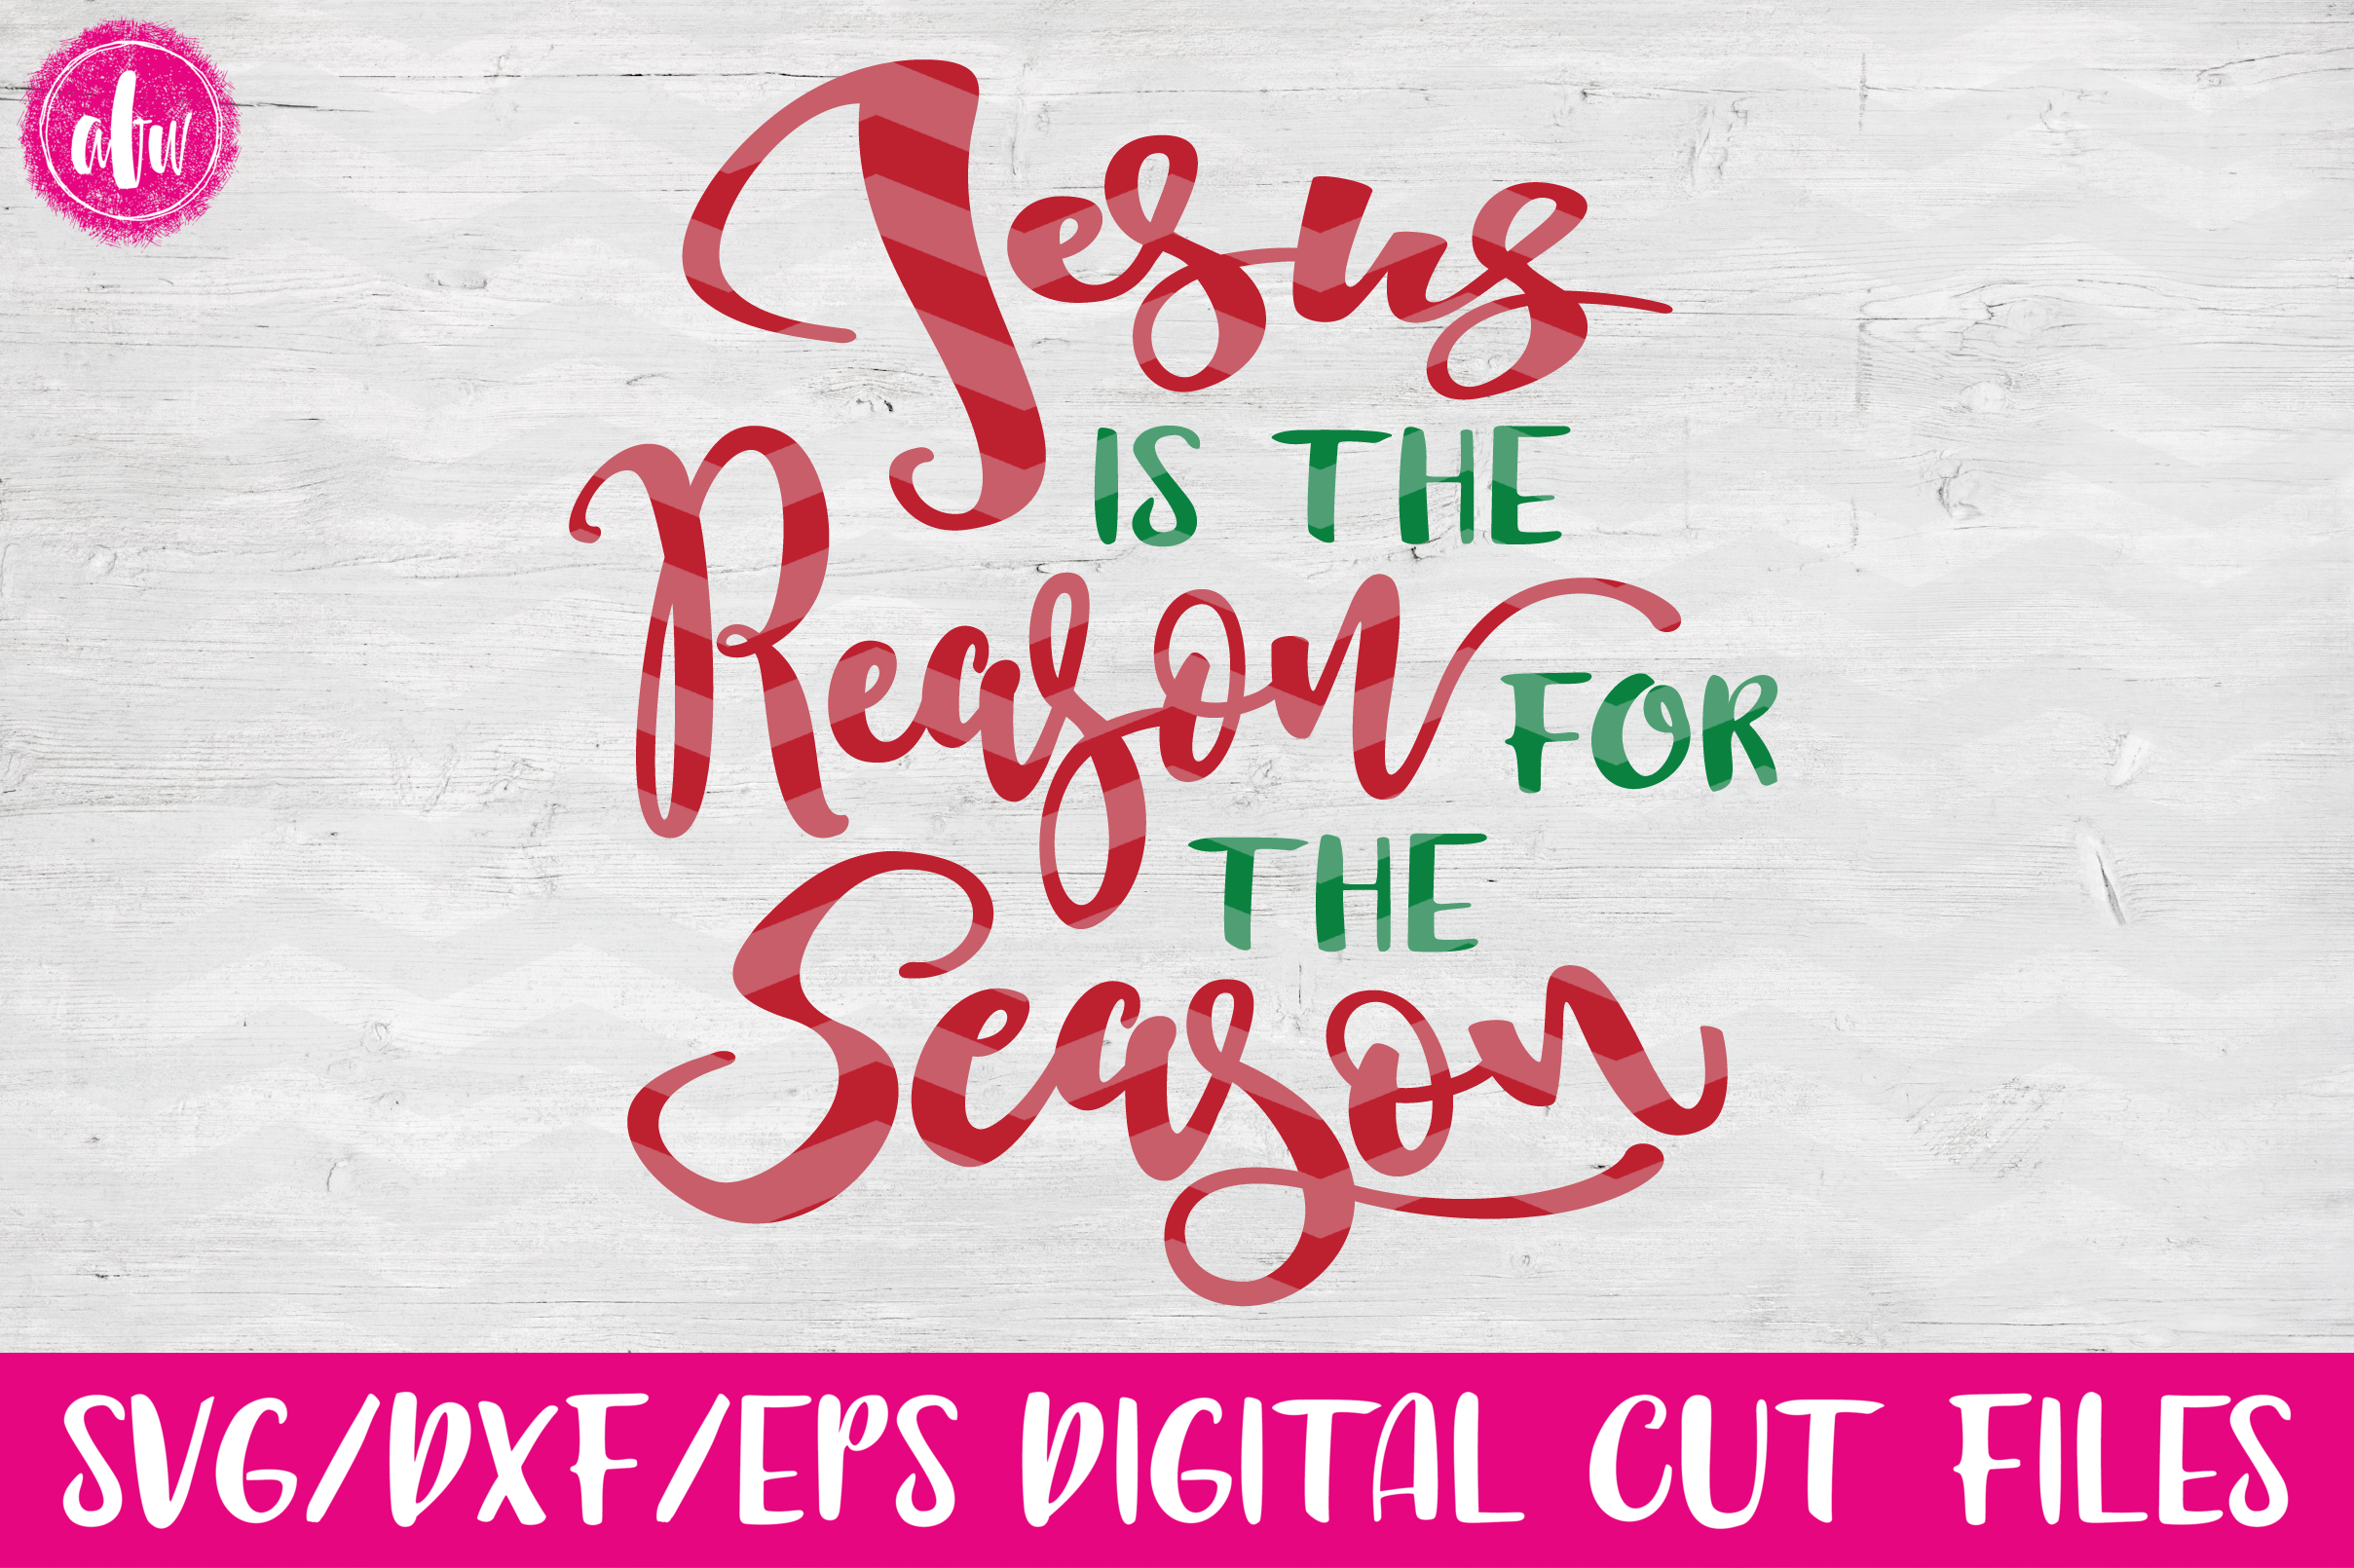 Download Jesus is the Reason for the Season - SVG, DXF, EPS Cut ...